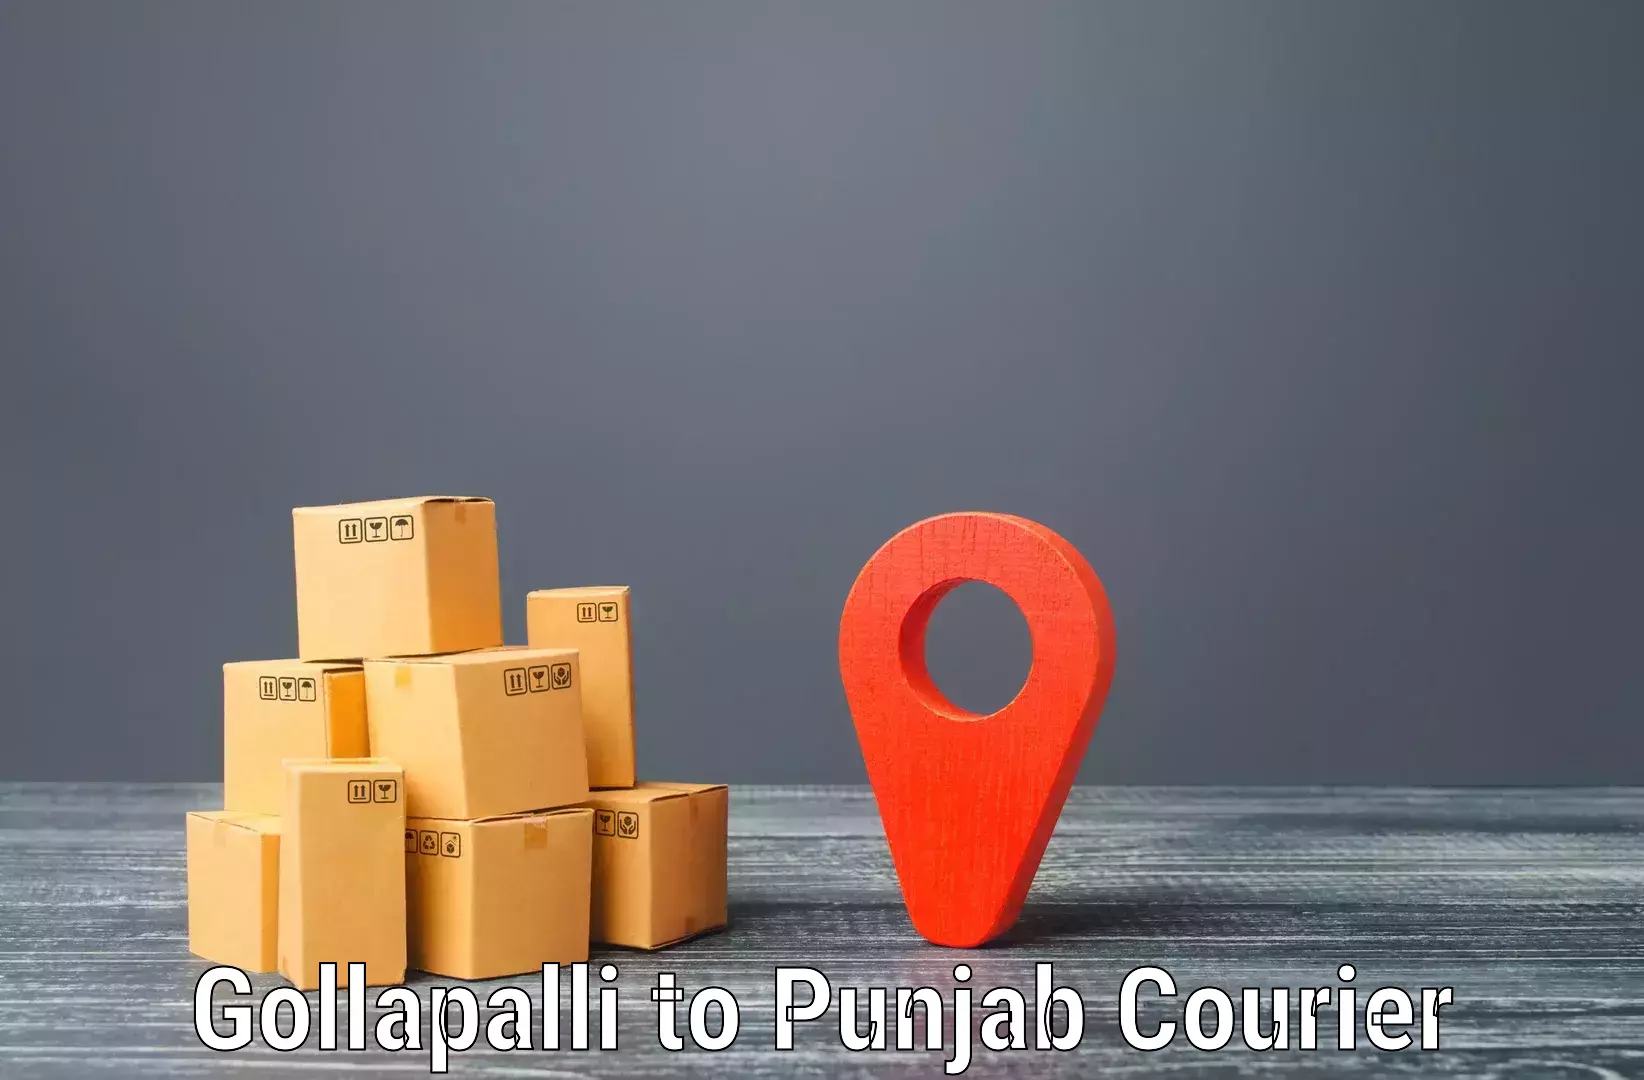 Customizable delivery plans Gollapalli to Moga